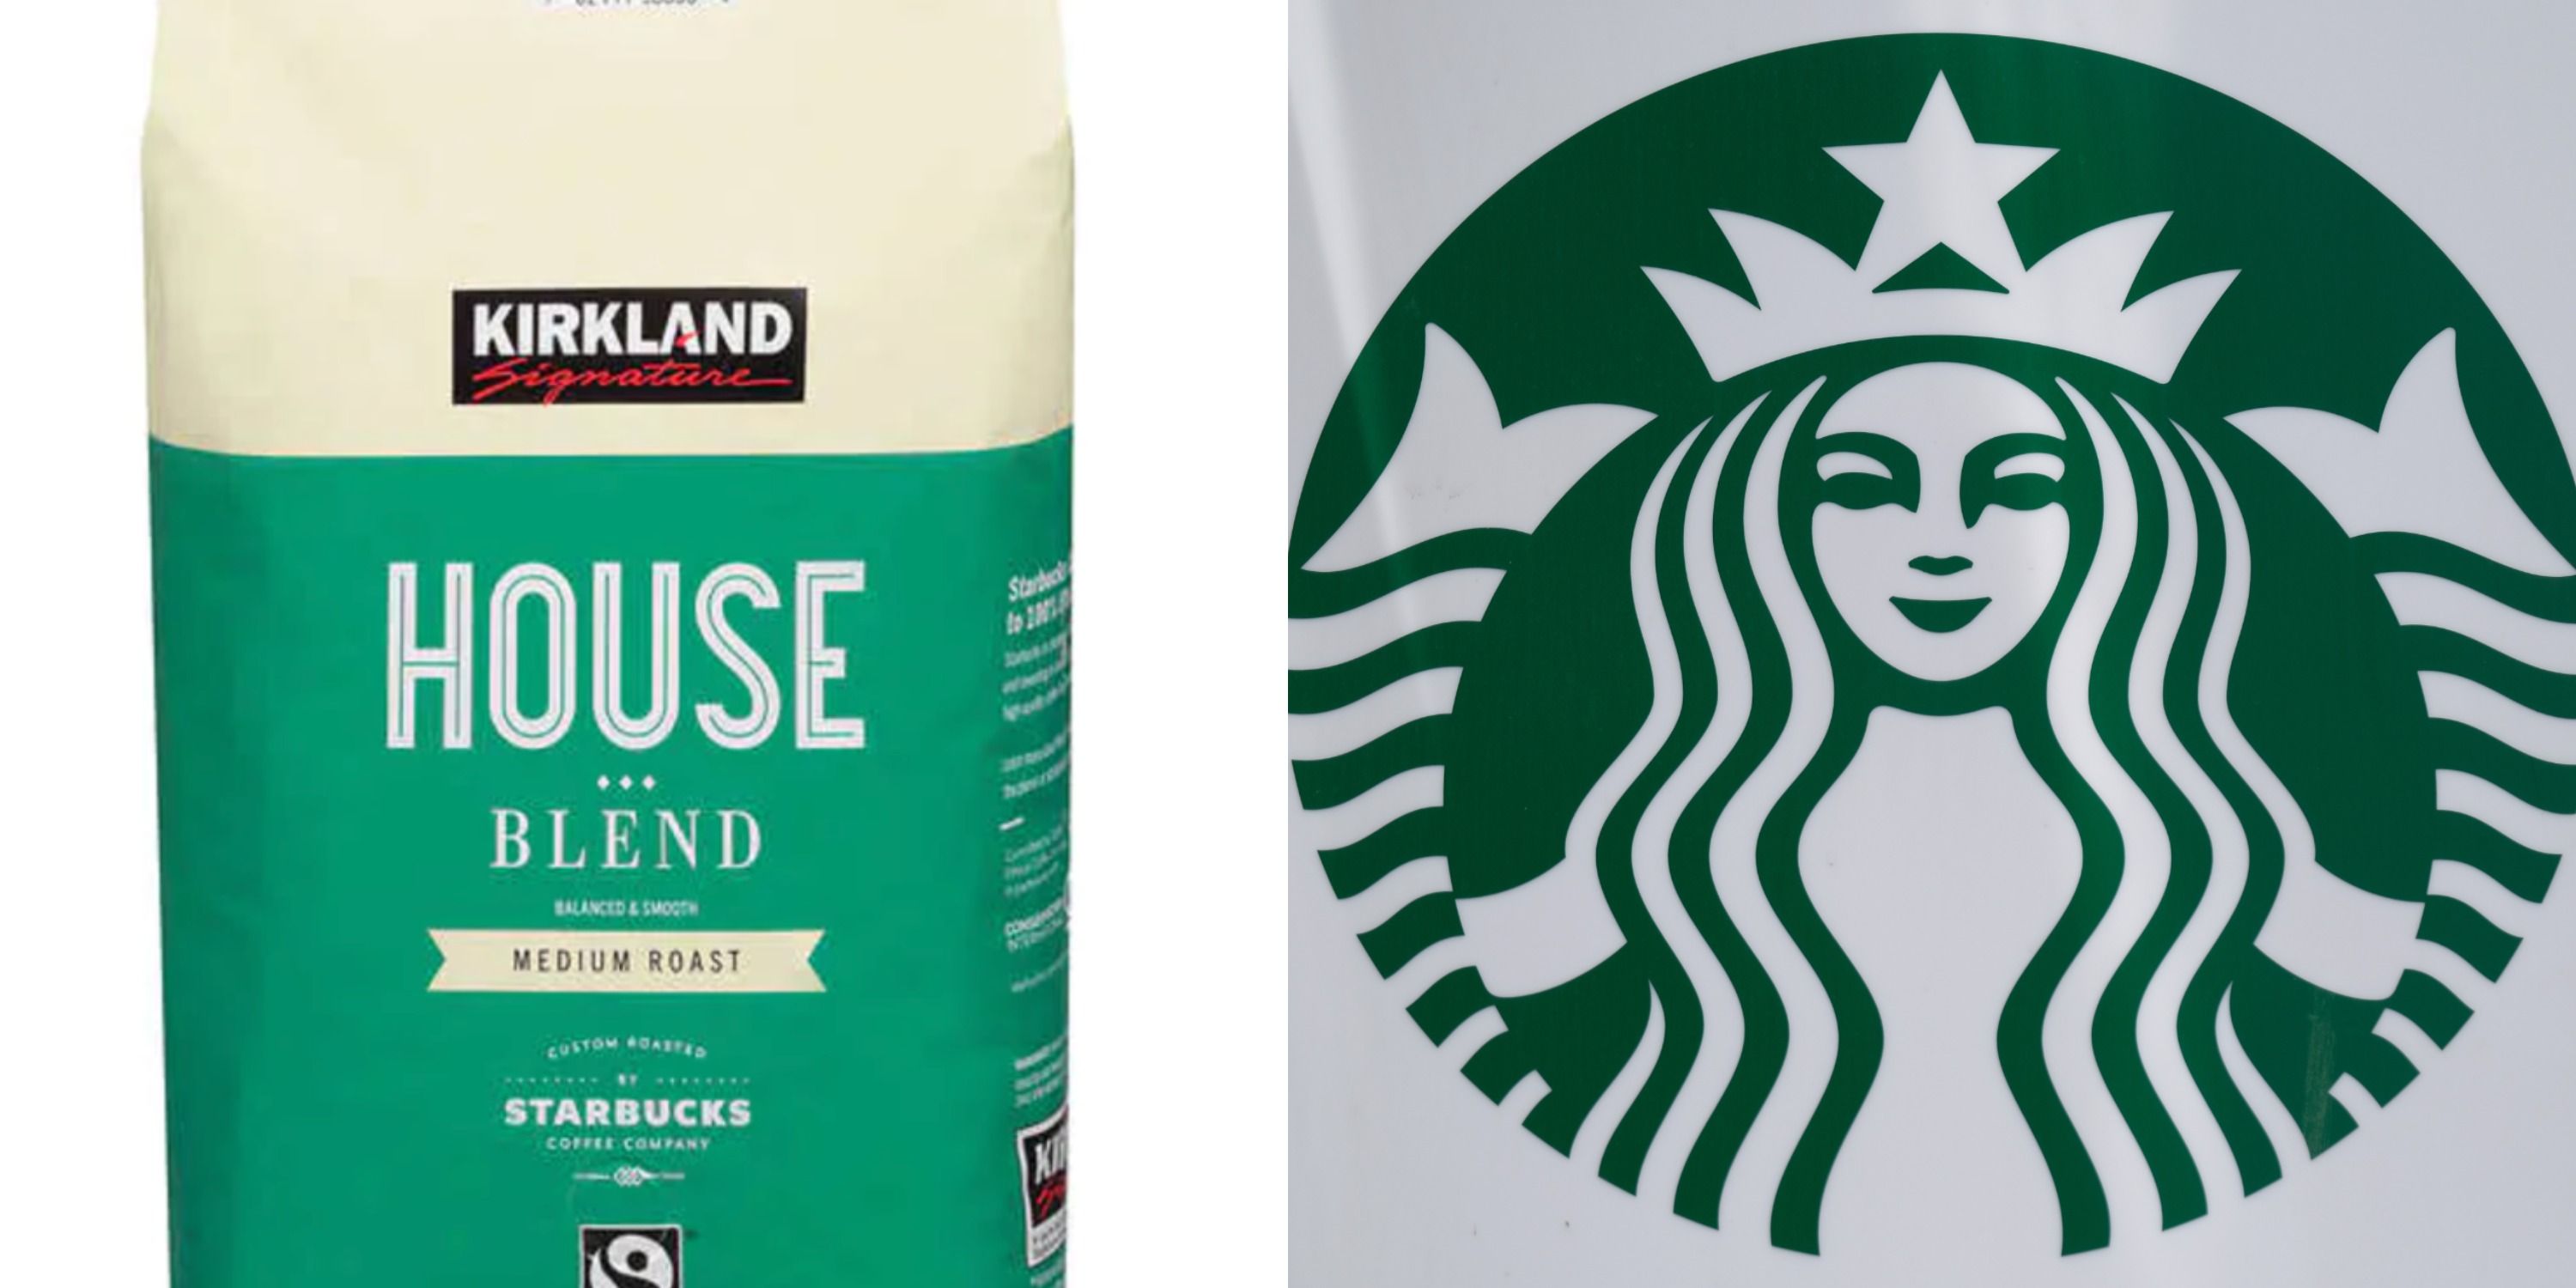 Some Of Costco's Kirkland Brand Coffee Is Made By Starbucks